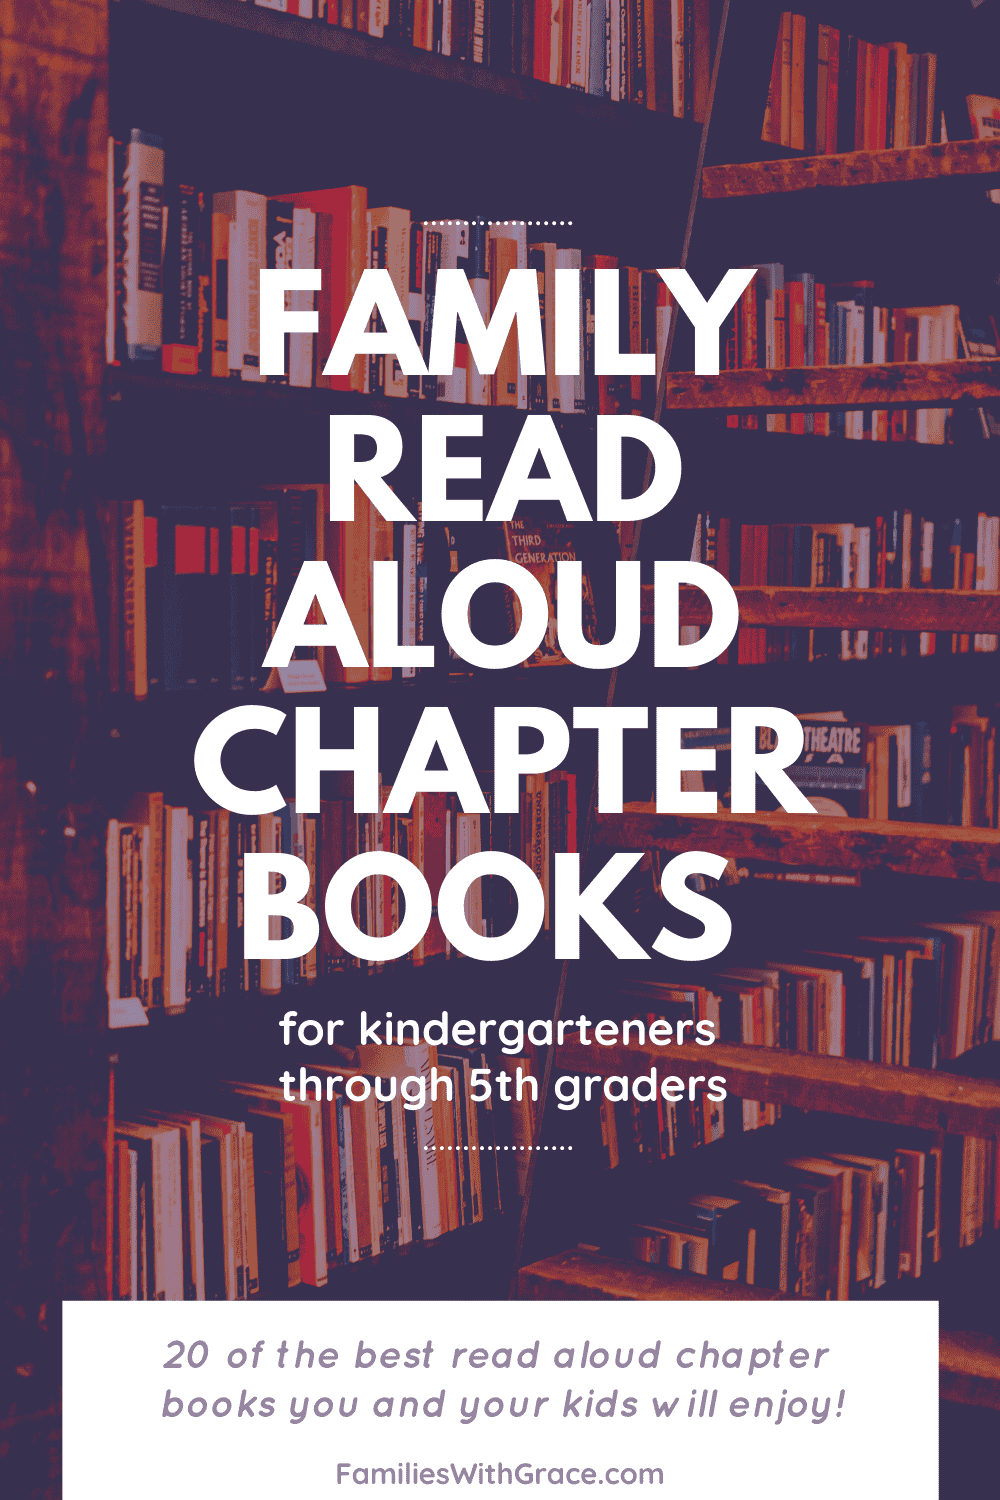 Family read aloud chapter books for kindergarteners through 5th graders